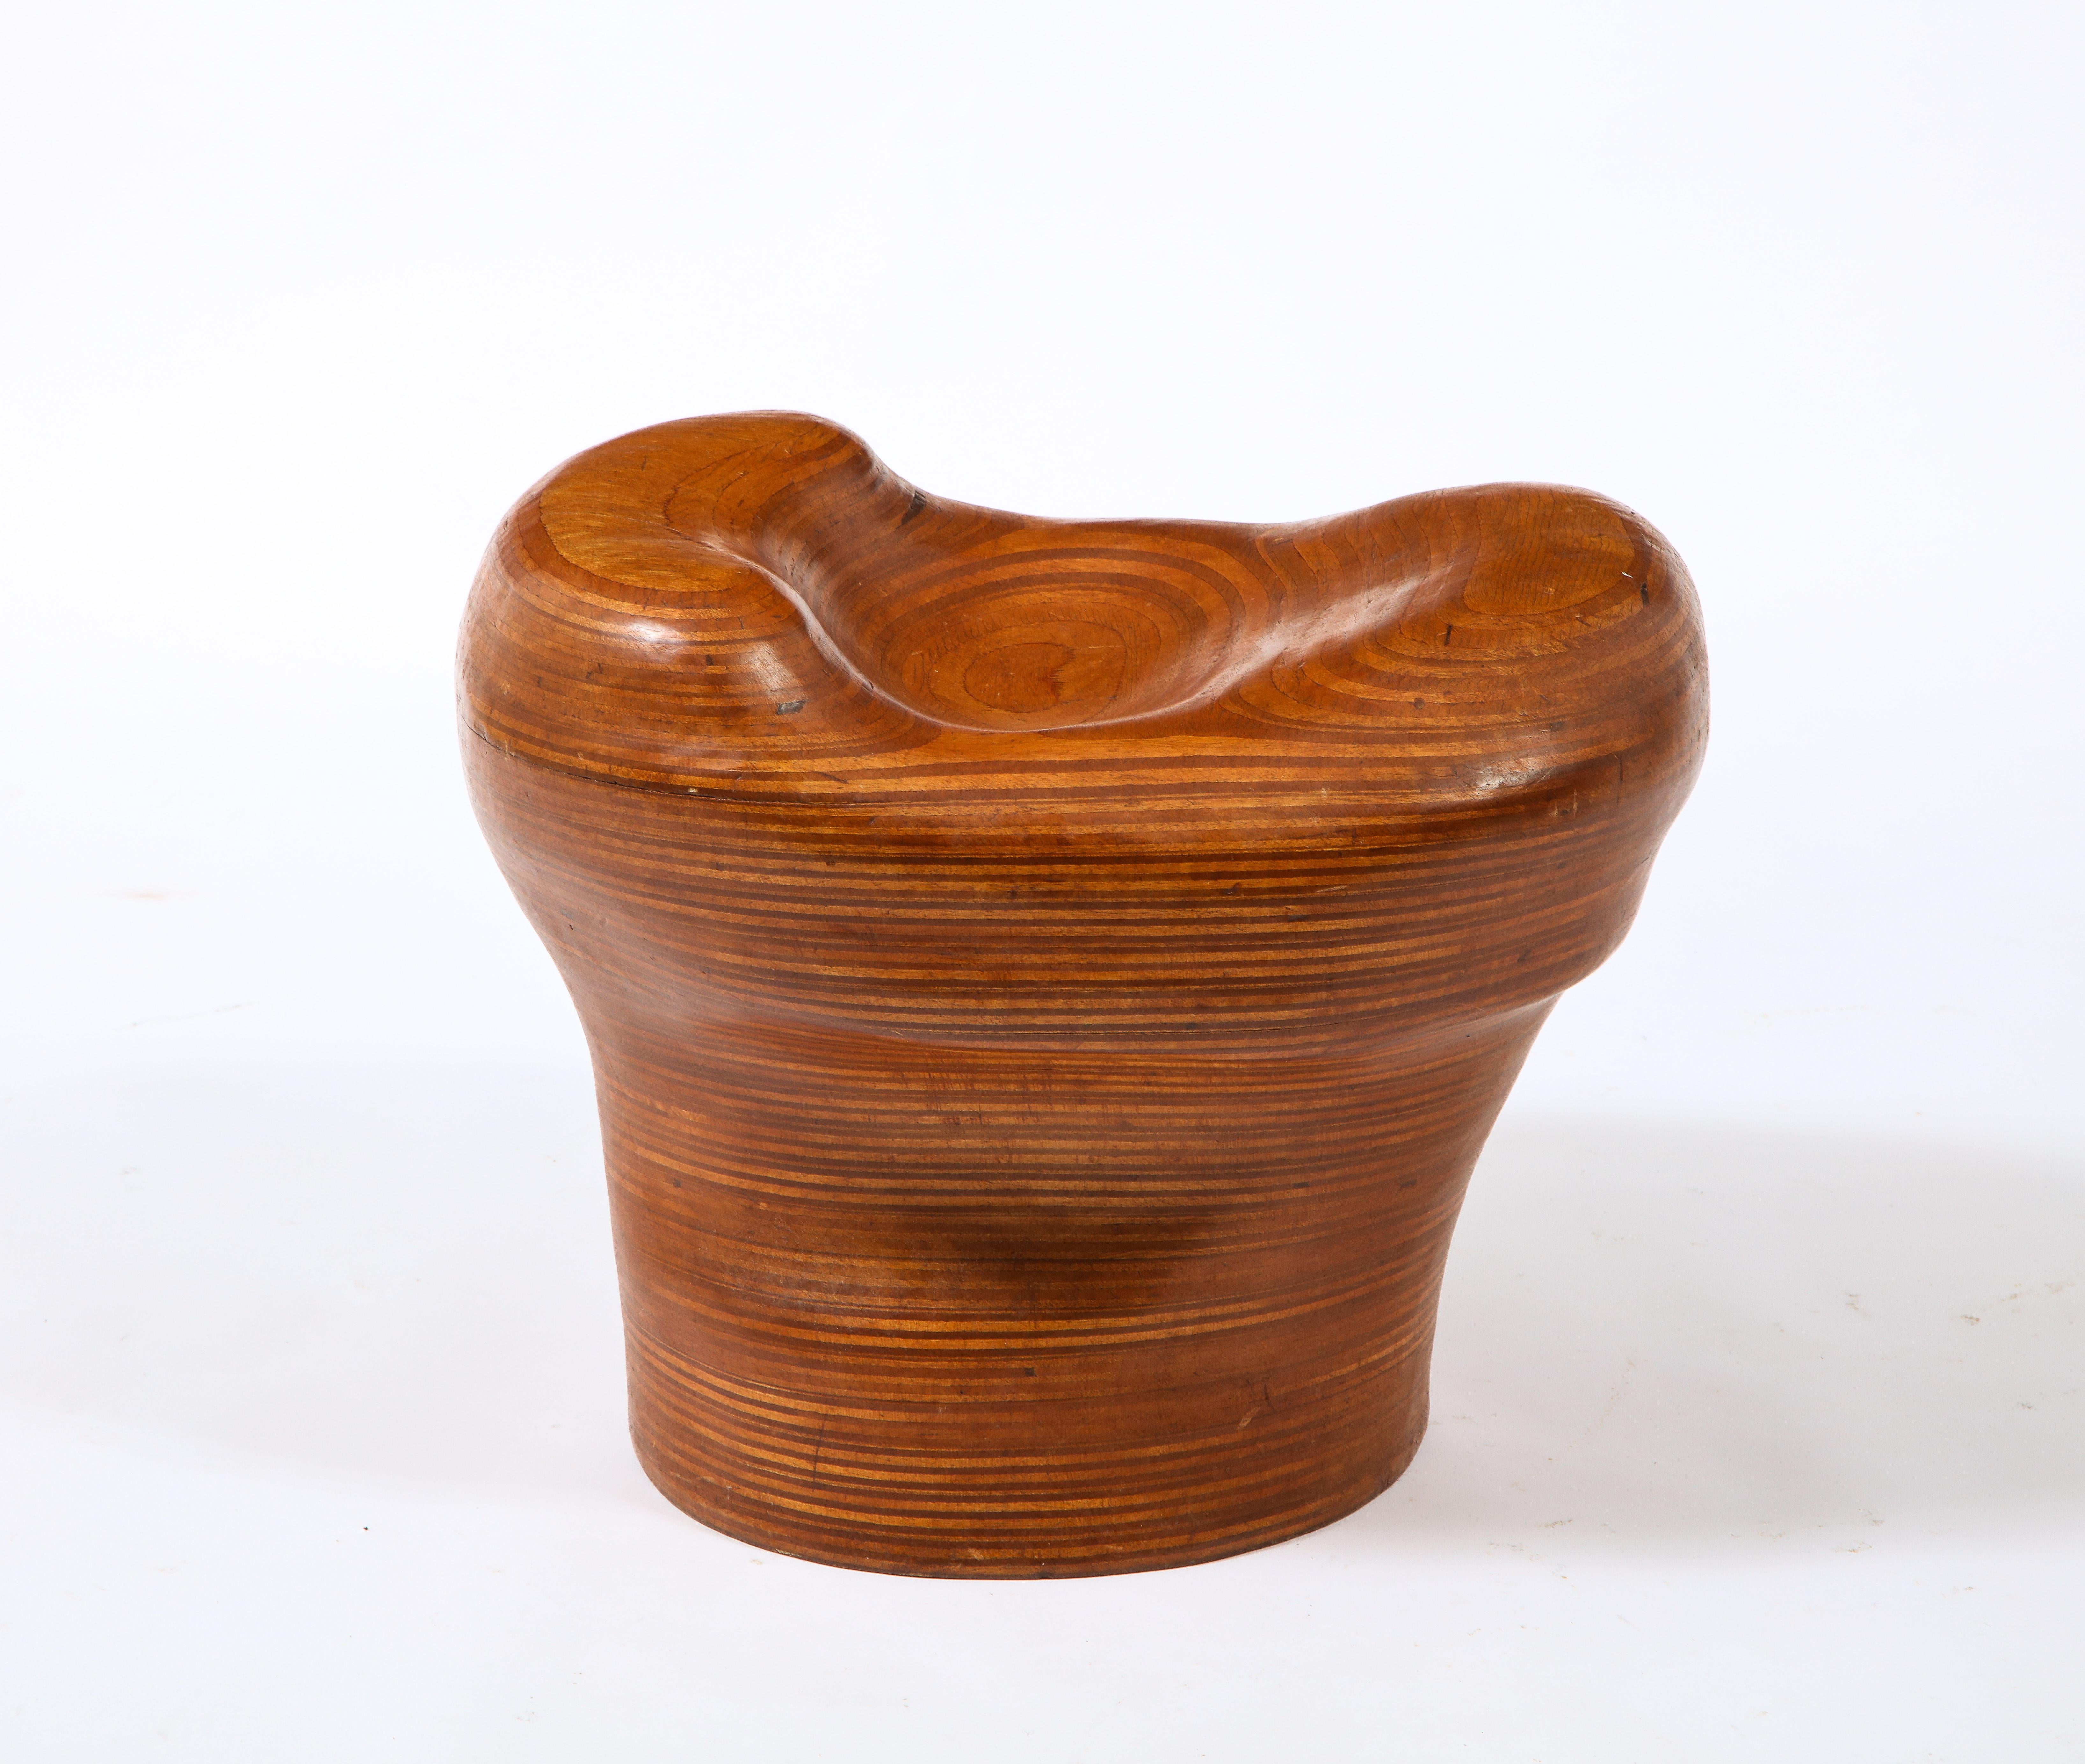 Denis Cospen Biomorphic Stool in Laminated Wood, France 1960's For Sale 4